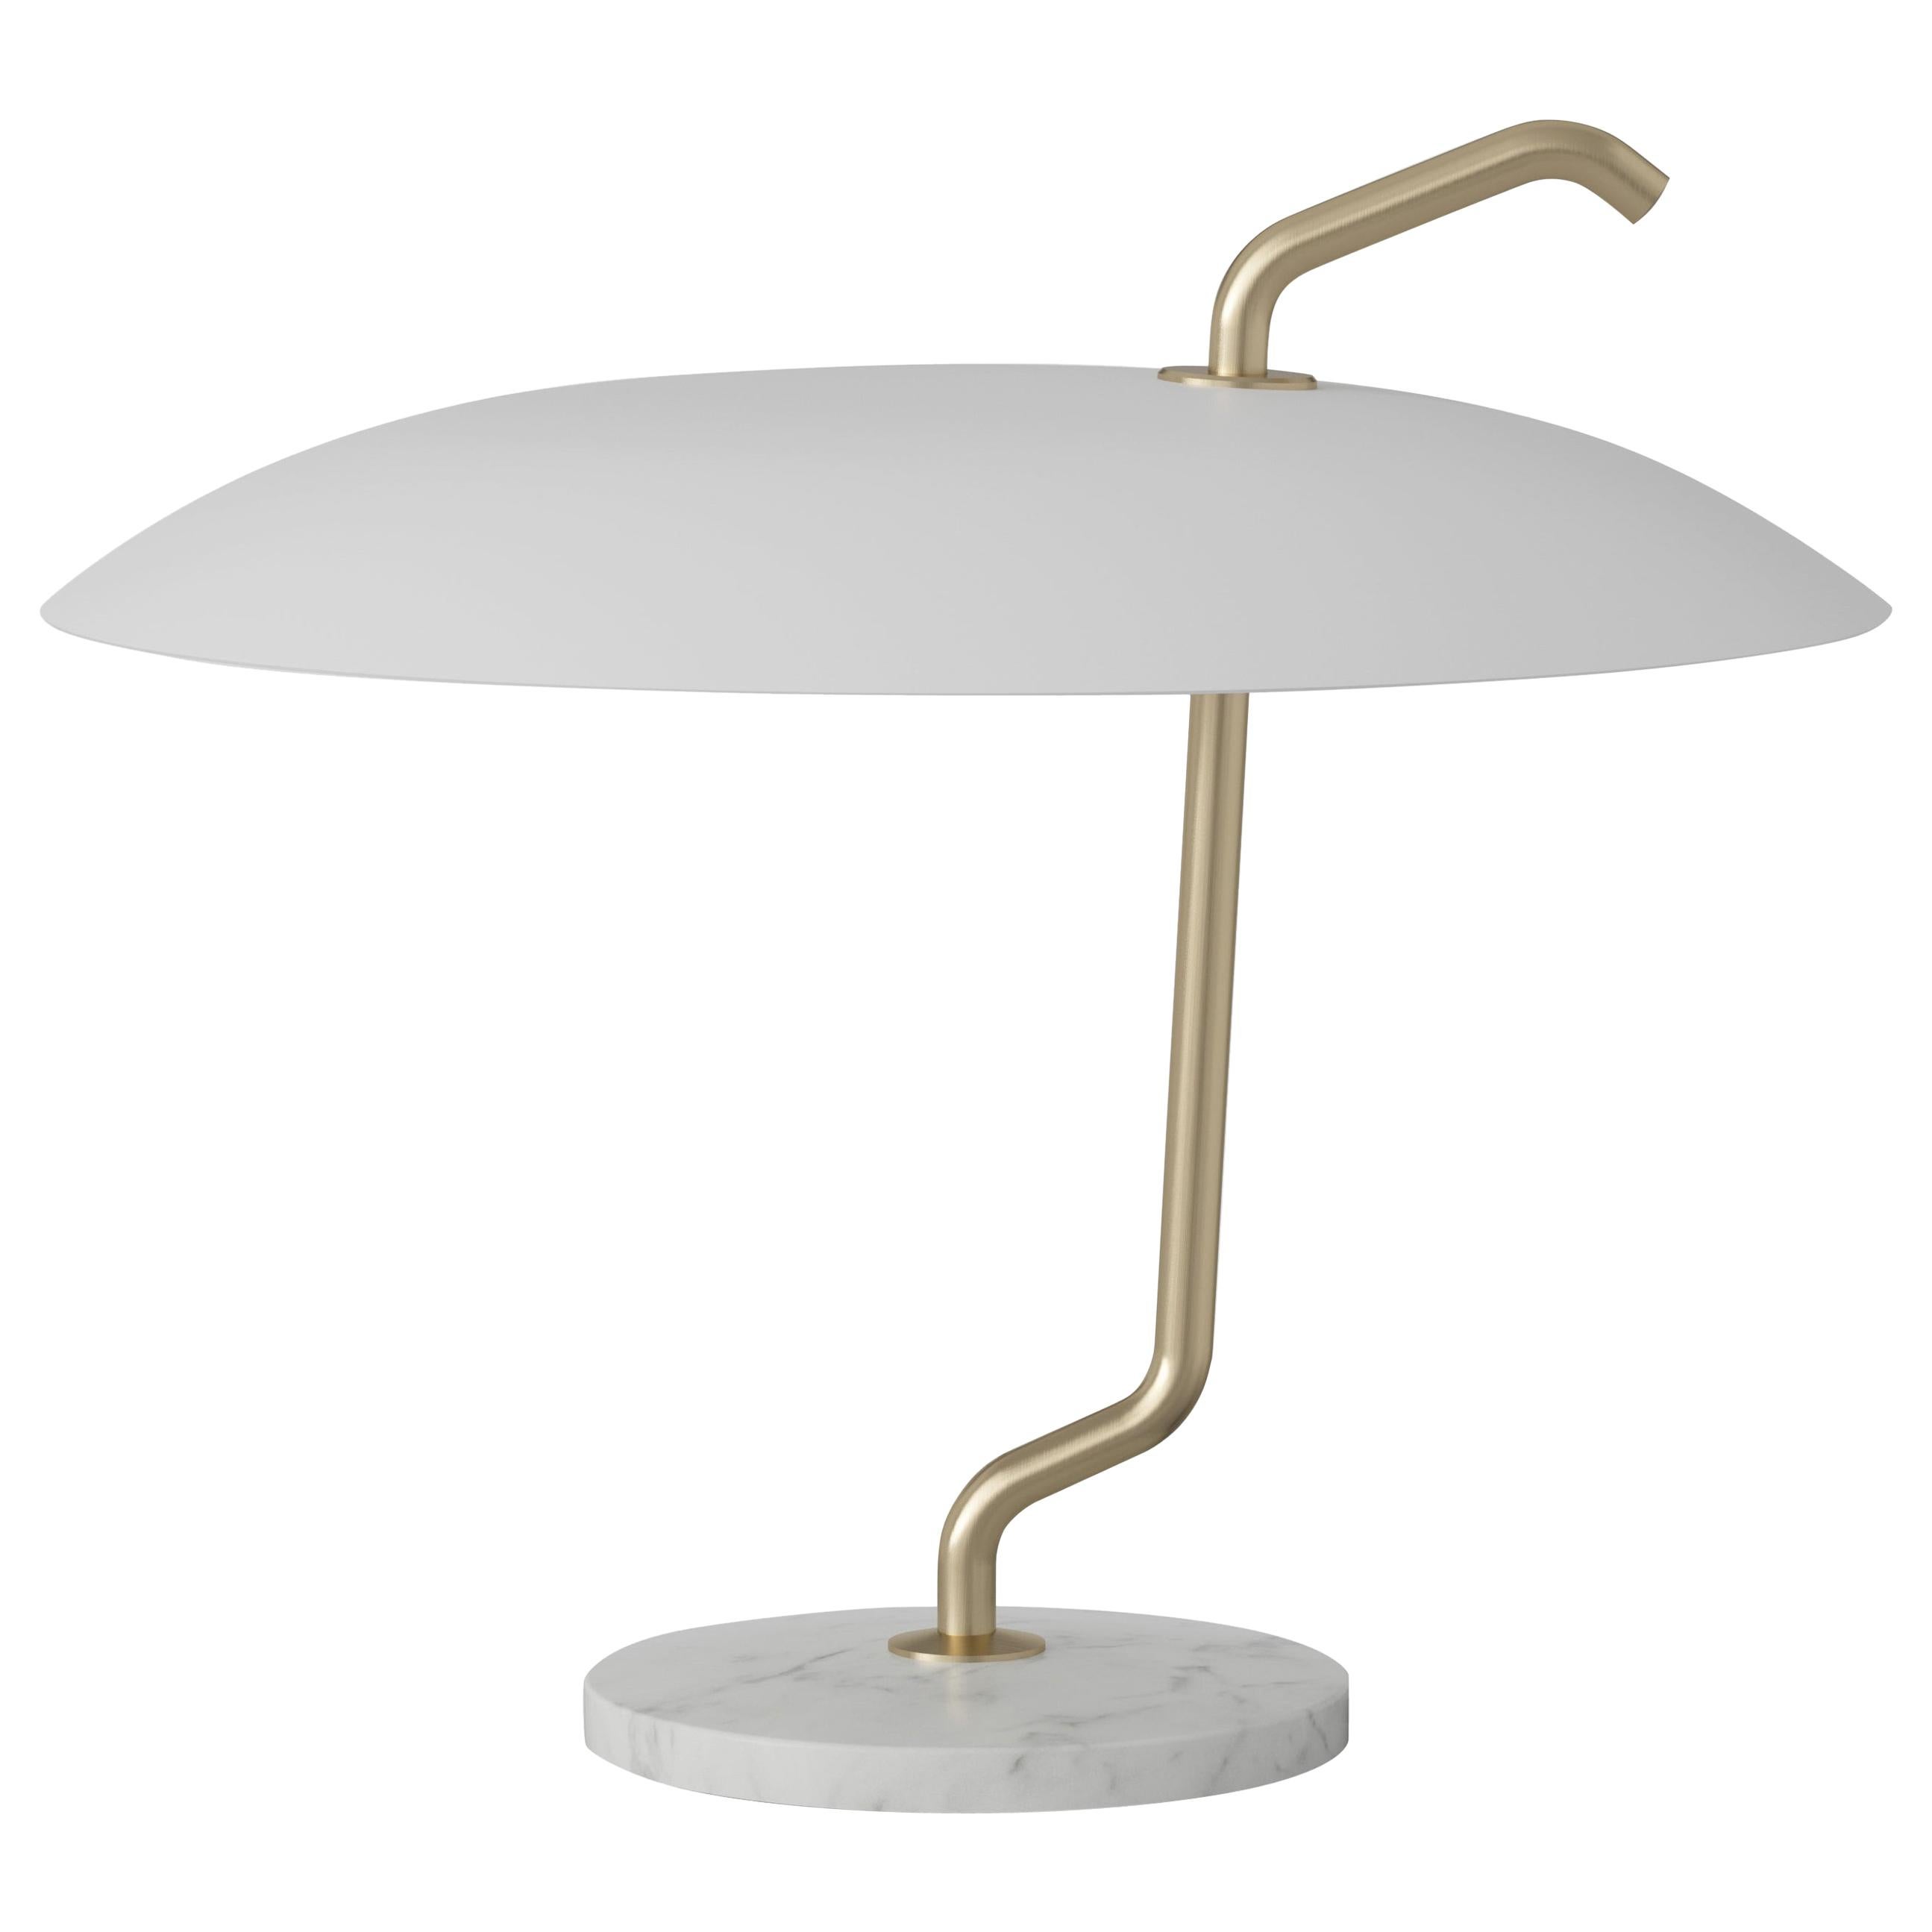 Gino Sarfatti Lamp Model 537 Brass Structure, White Reflector for Astep For Sale